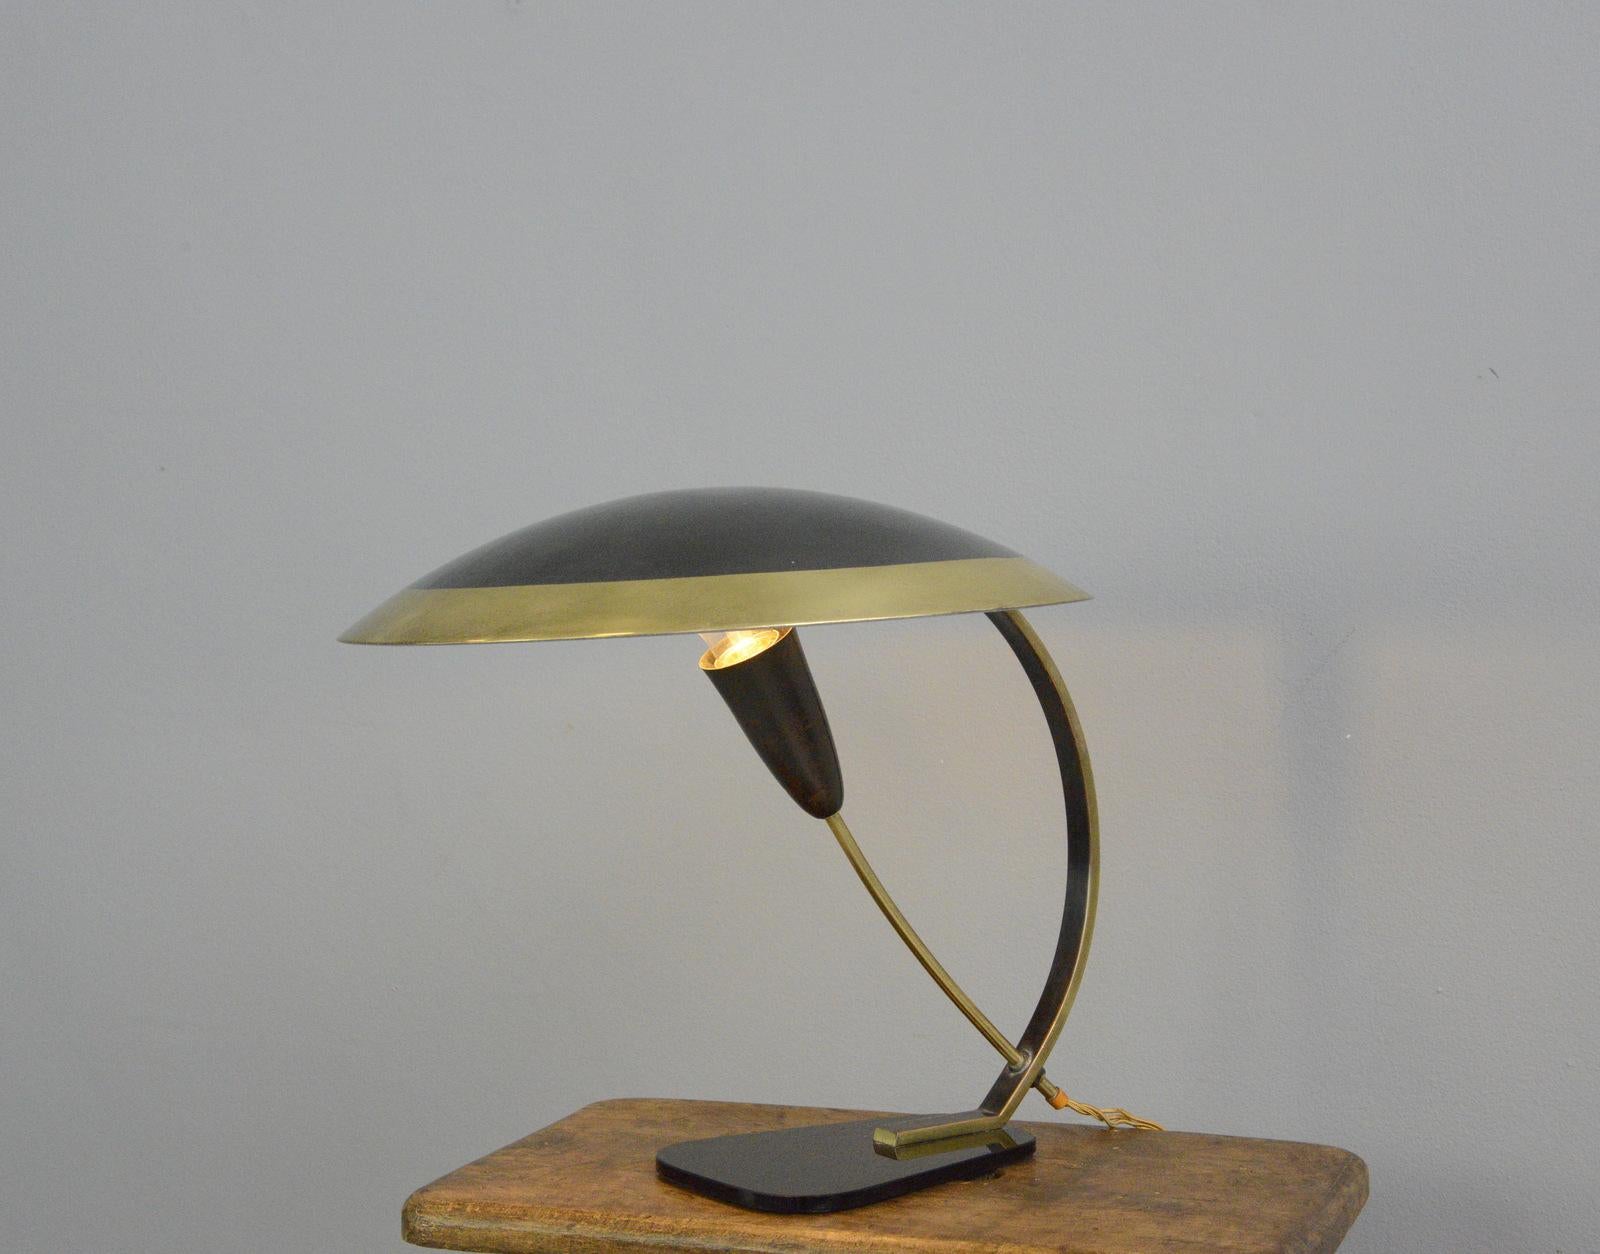 Brass Midcentury Table Lamp by Helo, circa 1950s